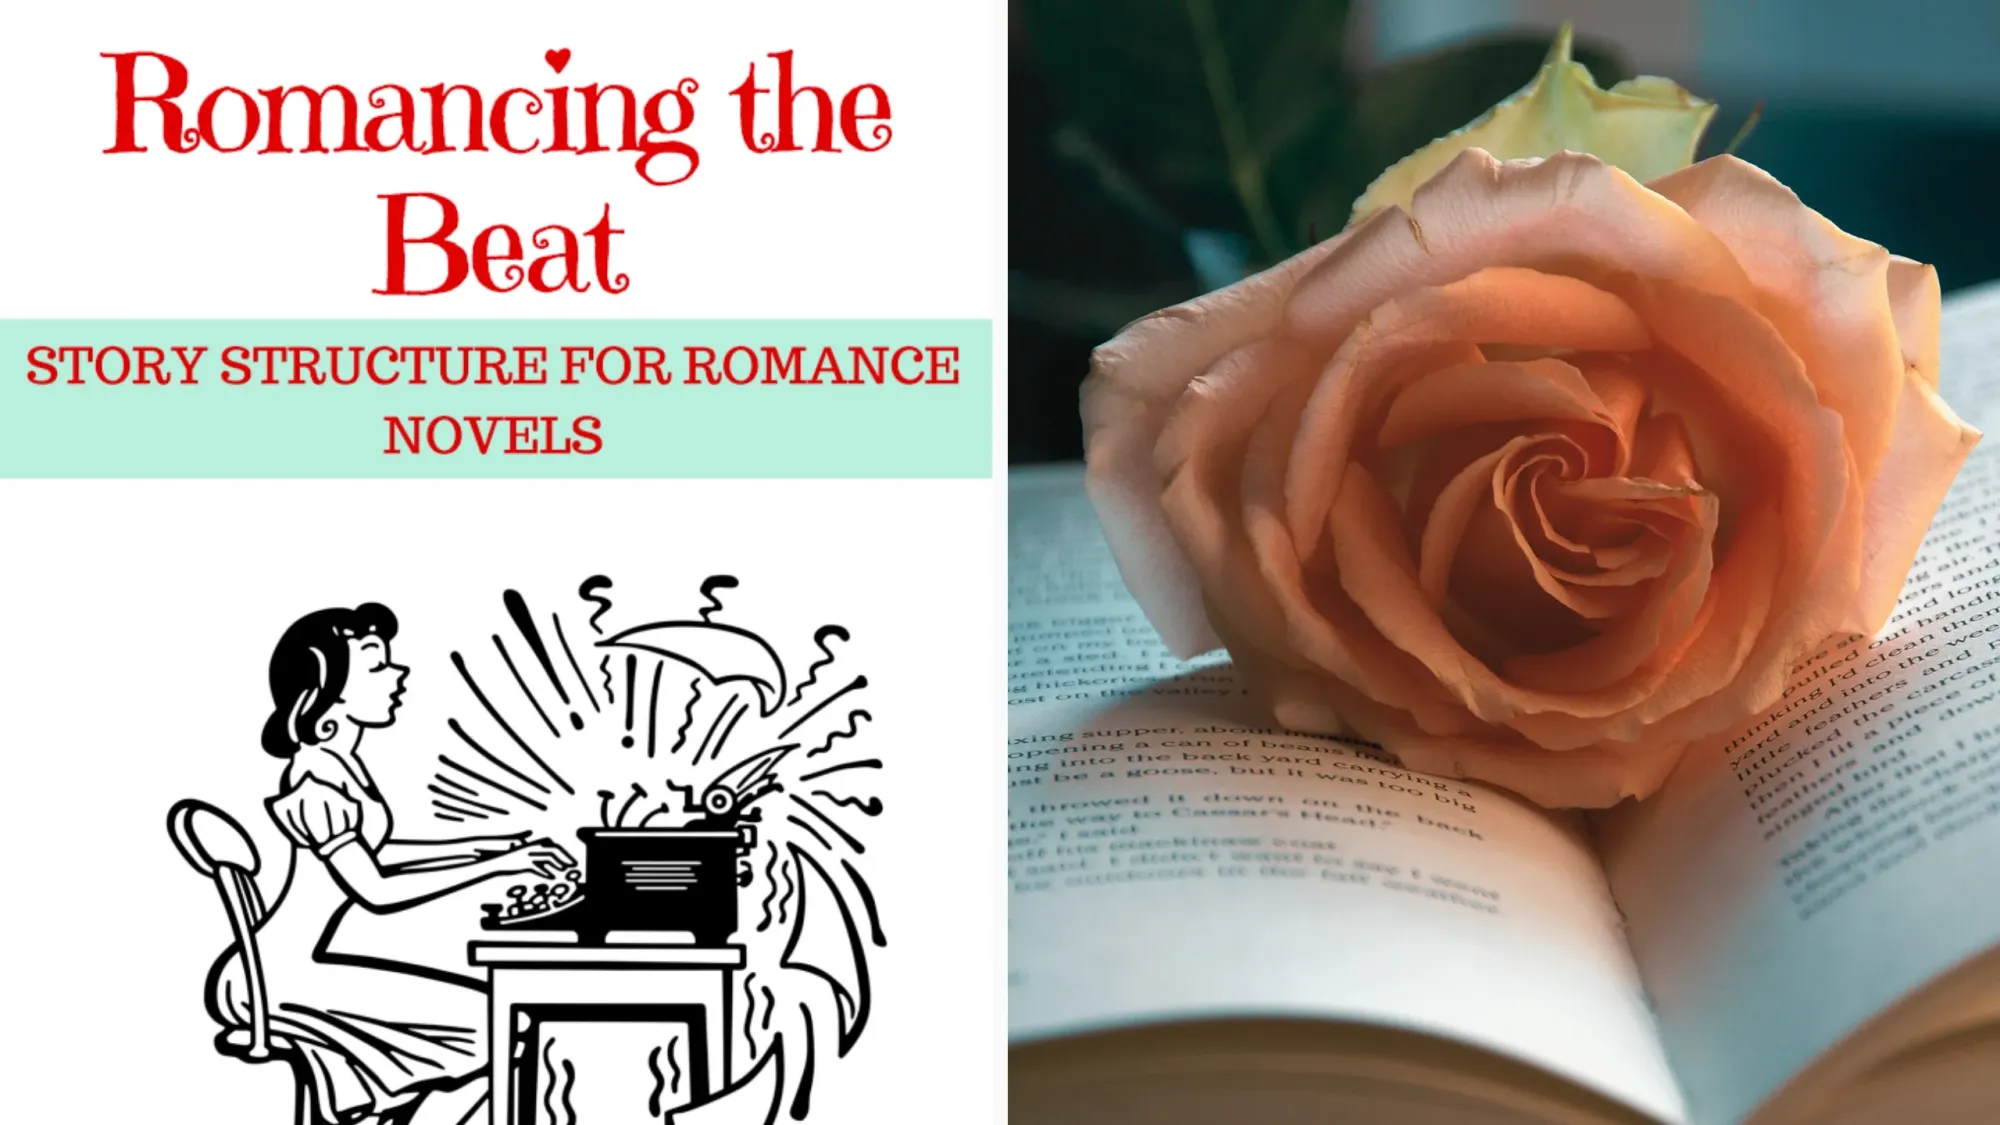 Book cover for Gwen Hayes' Romancing the Beat book on plot structure; peach-colored rose on book with pages open.